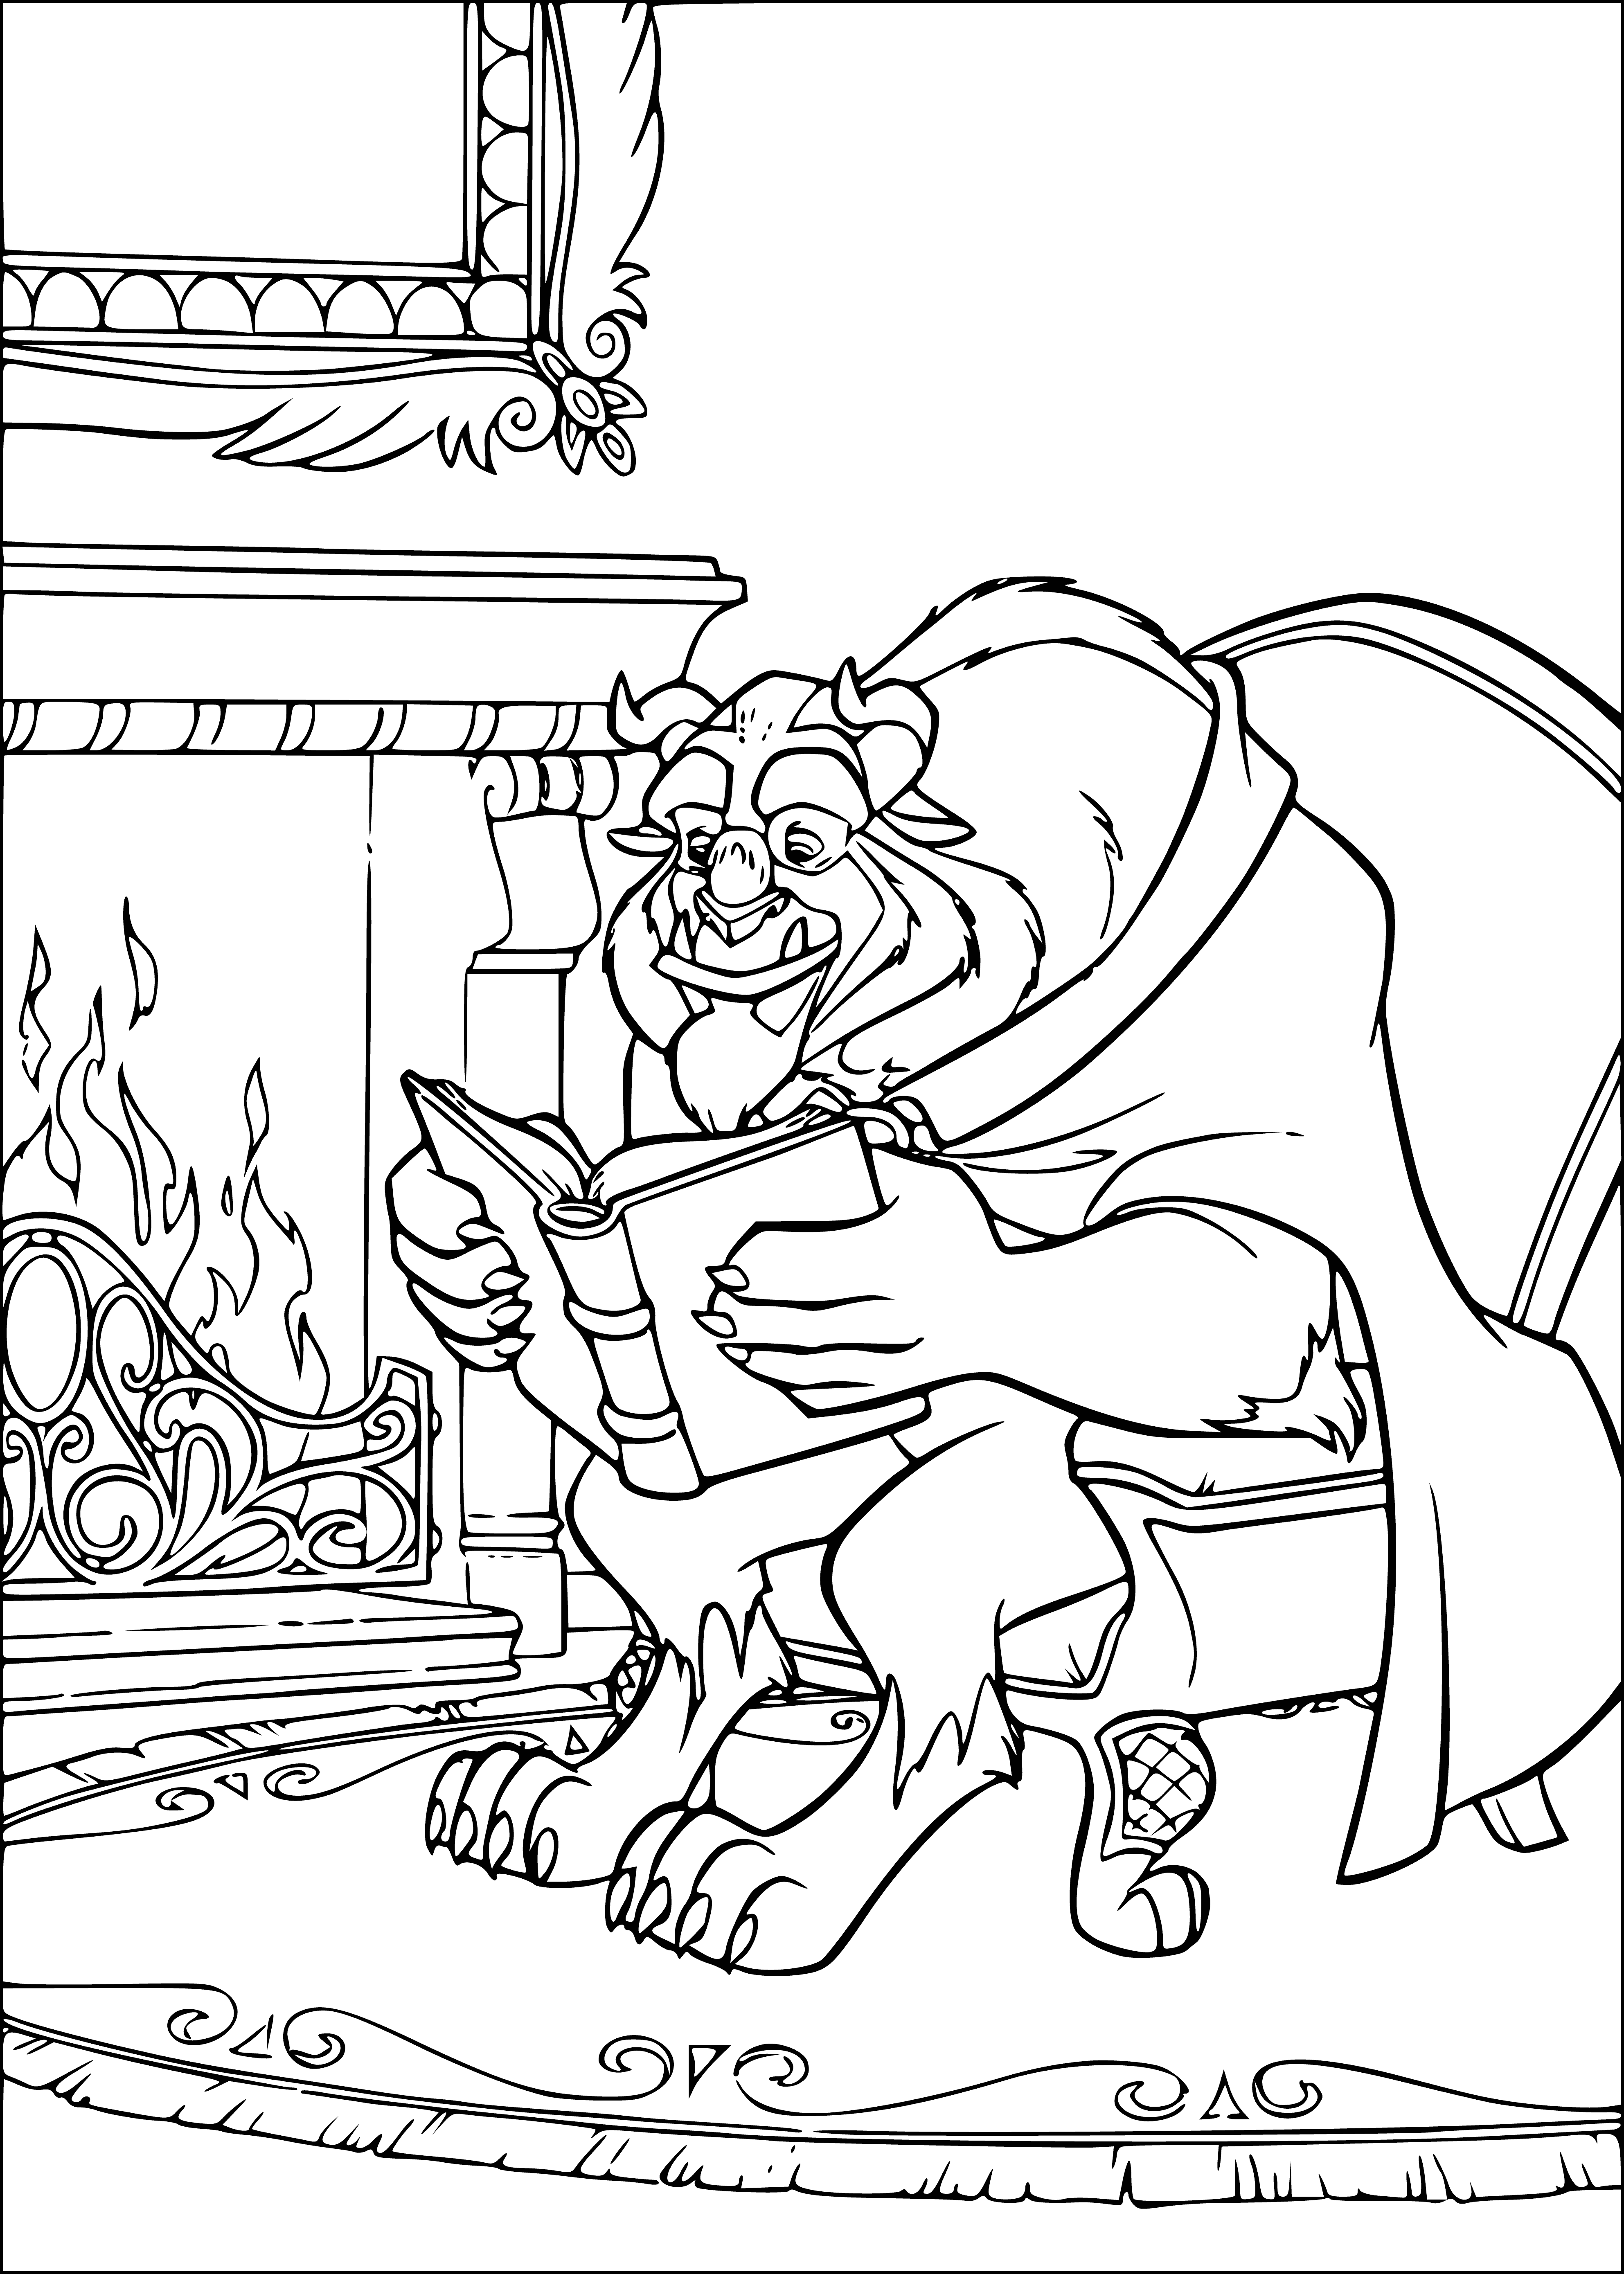 coloring page: Large, furry creature resembling lion/human sits on stone throne, clutching book in paw; has thick mane, vaguely human face with long nose, large eyes.